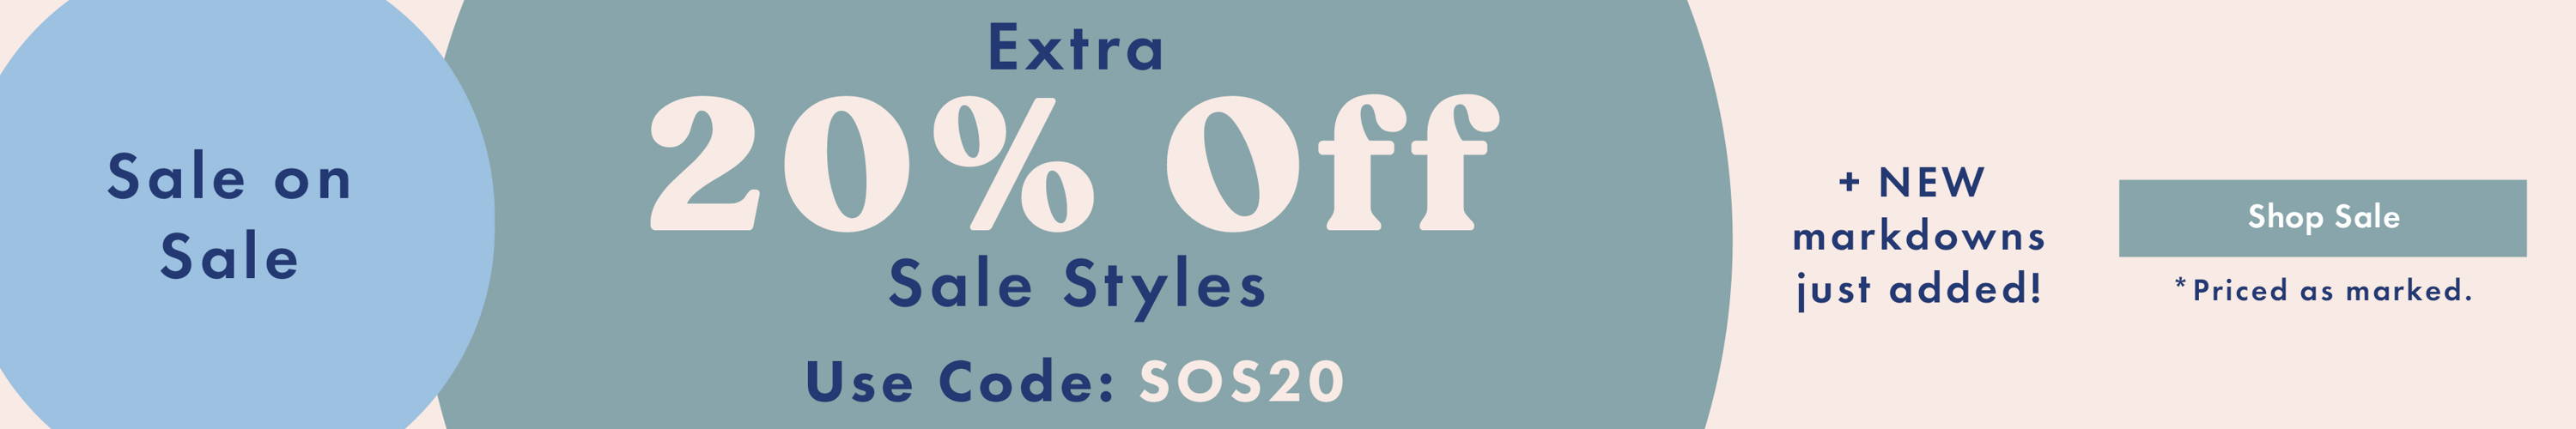 EXTRA 20% OFF SALE STYLES Use Code: SOS20 - New Markdowns Added *Priced as Marked